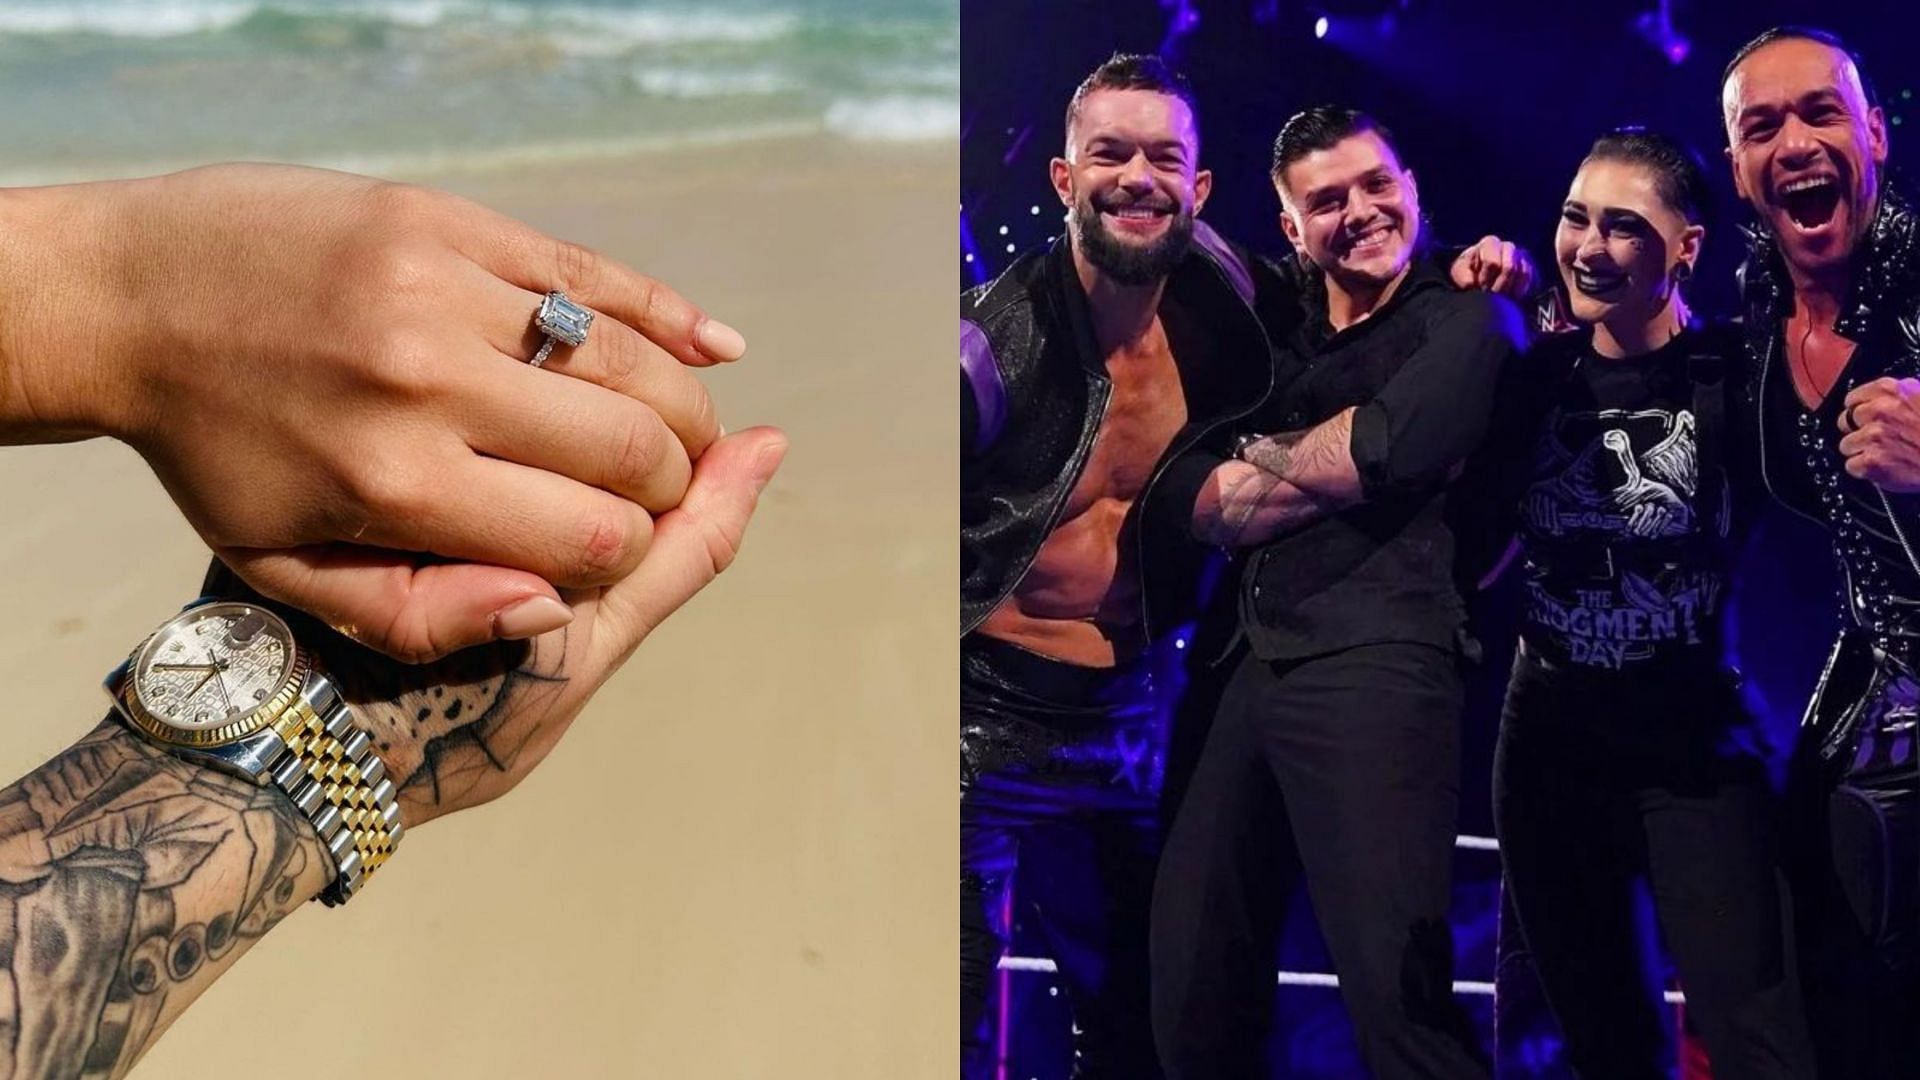 WWE Superstar Dominik Mysterio announced his engagement to his longtime girlfriend